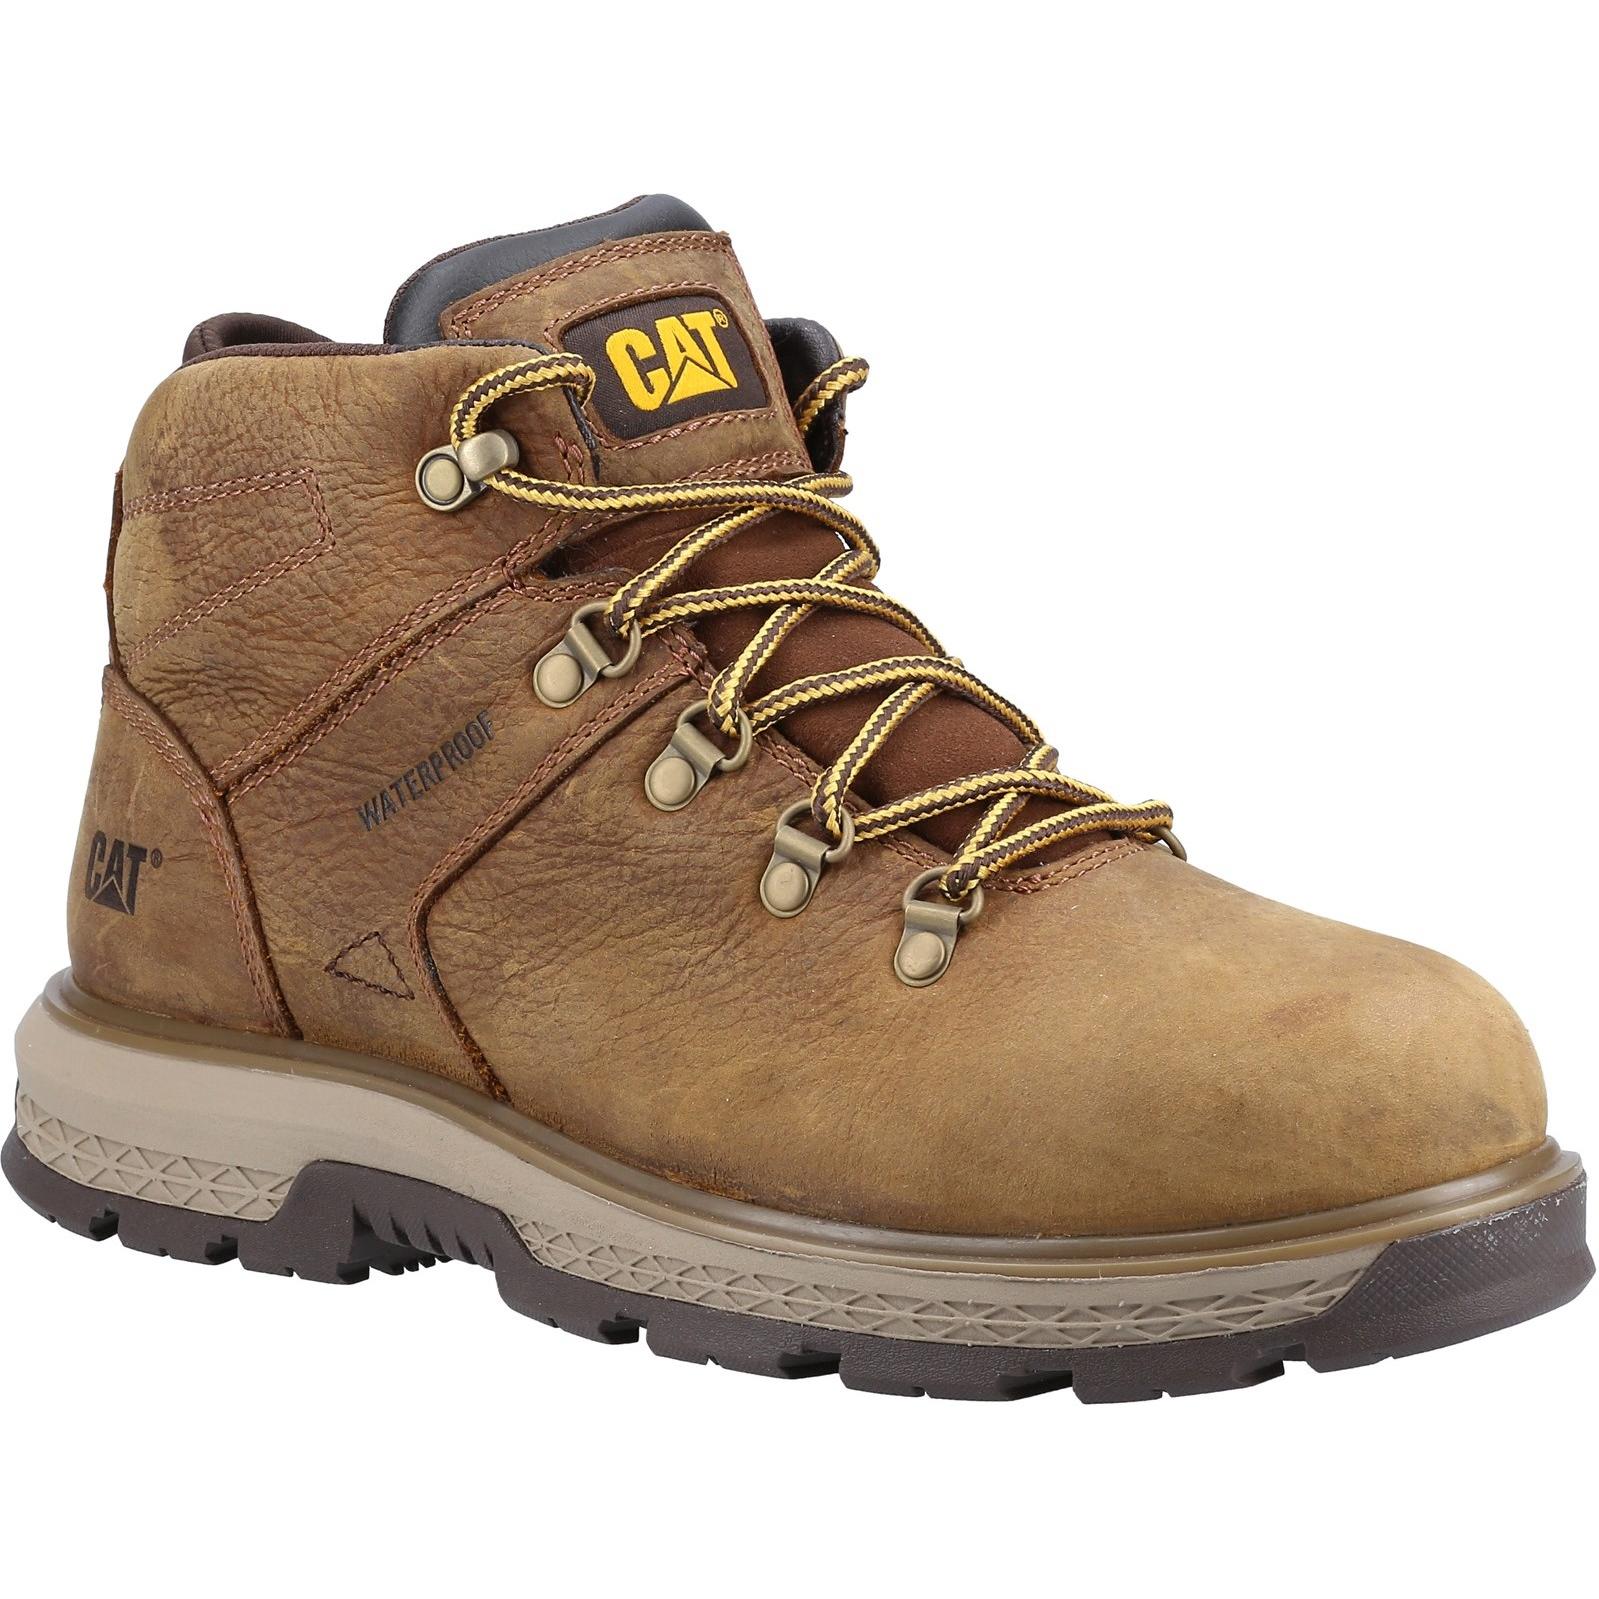 Cat Footwear Exposition Hiker Safety Boot